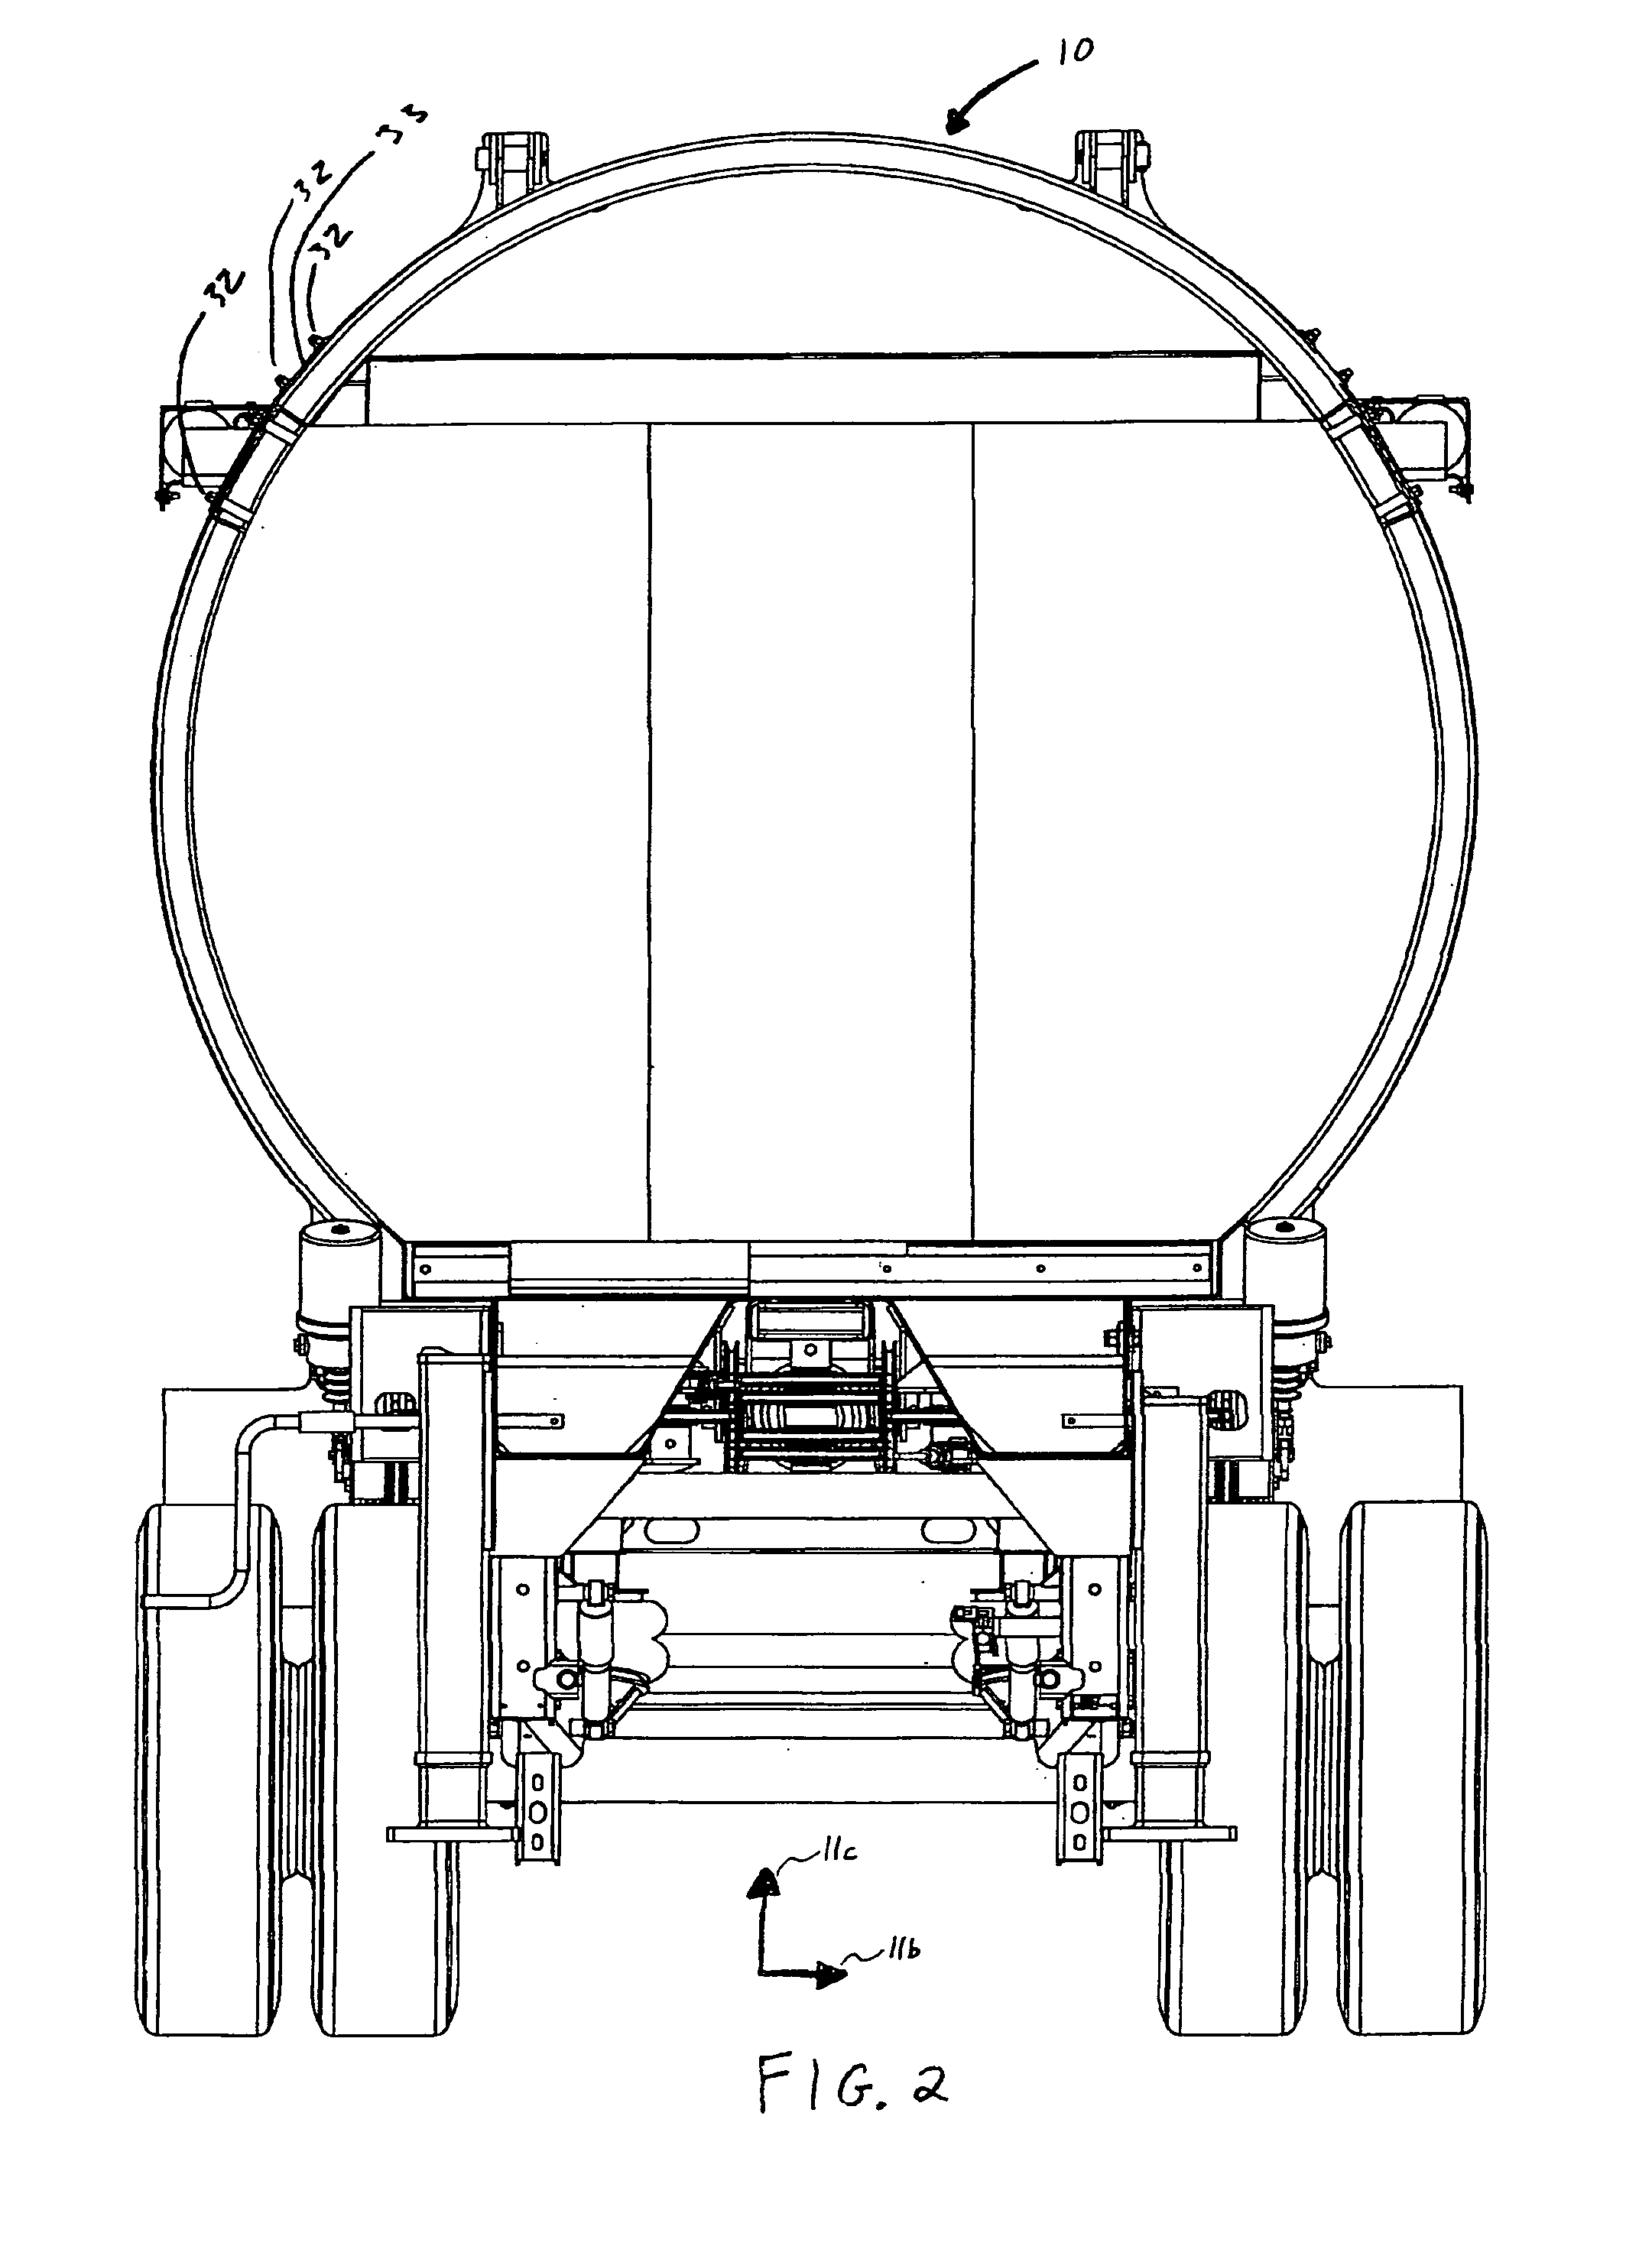 Material ejection system for a vehicle